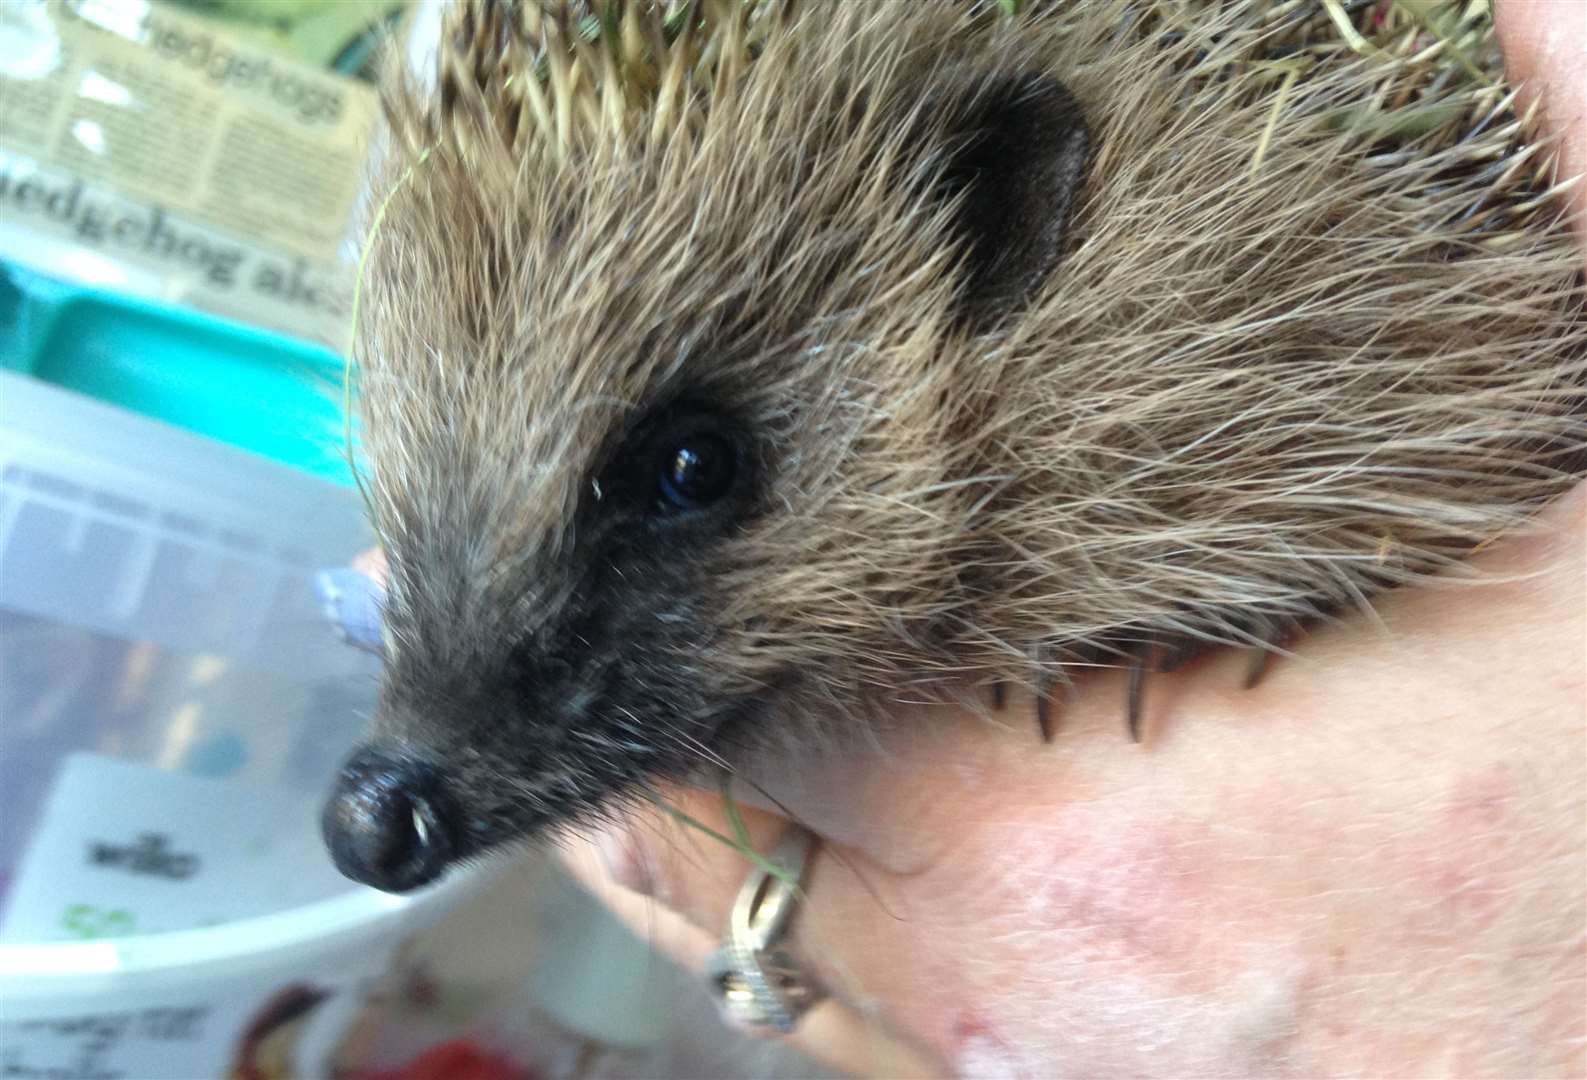 One of the hedgehogs being cared for by Lisa